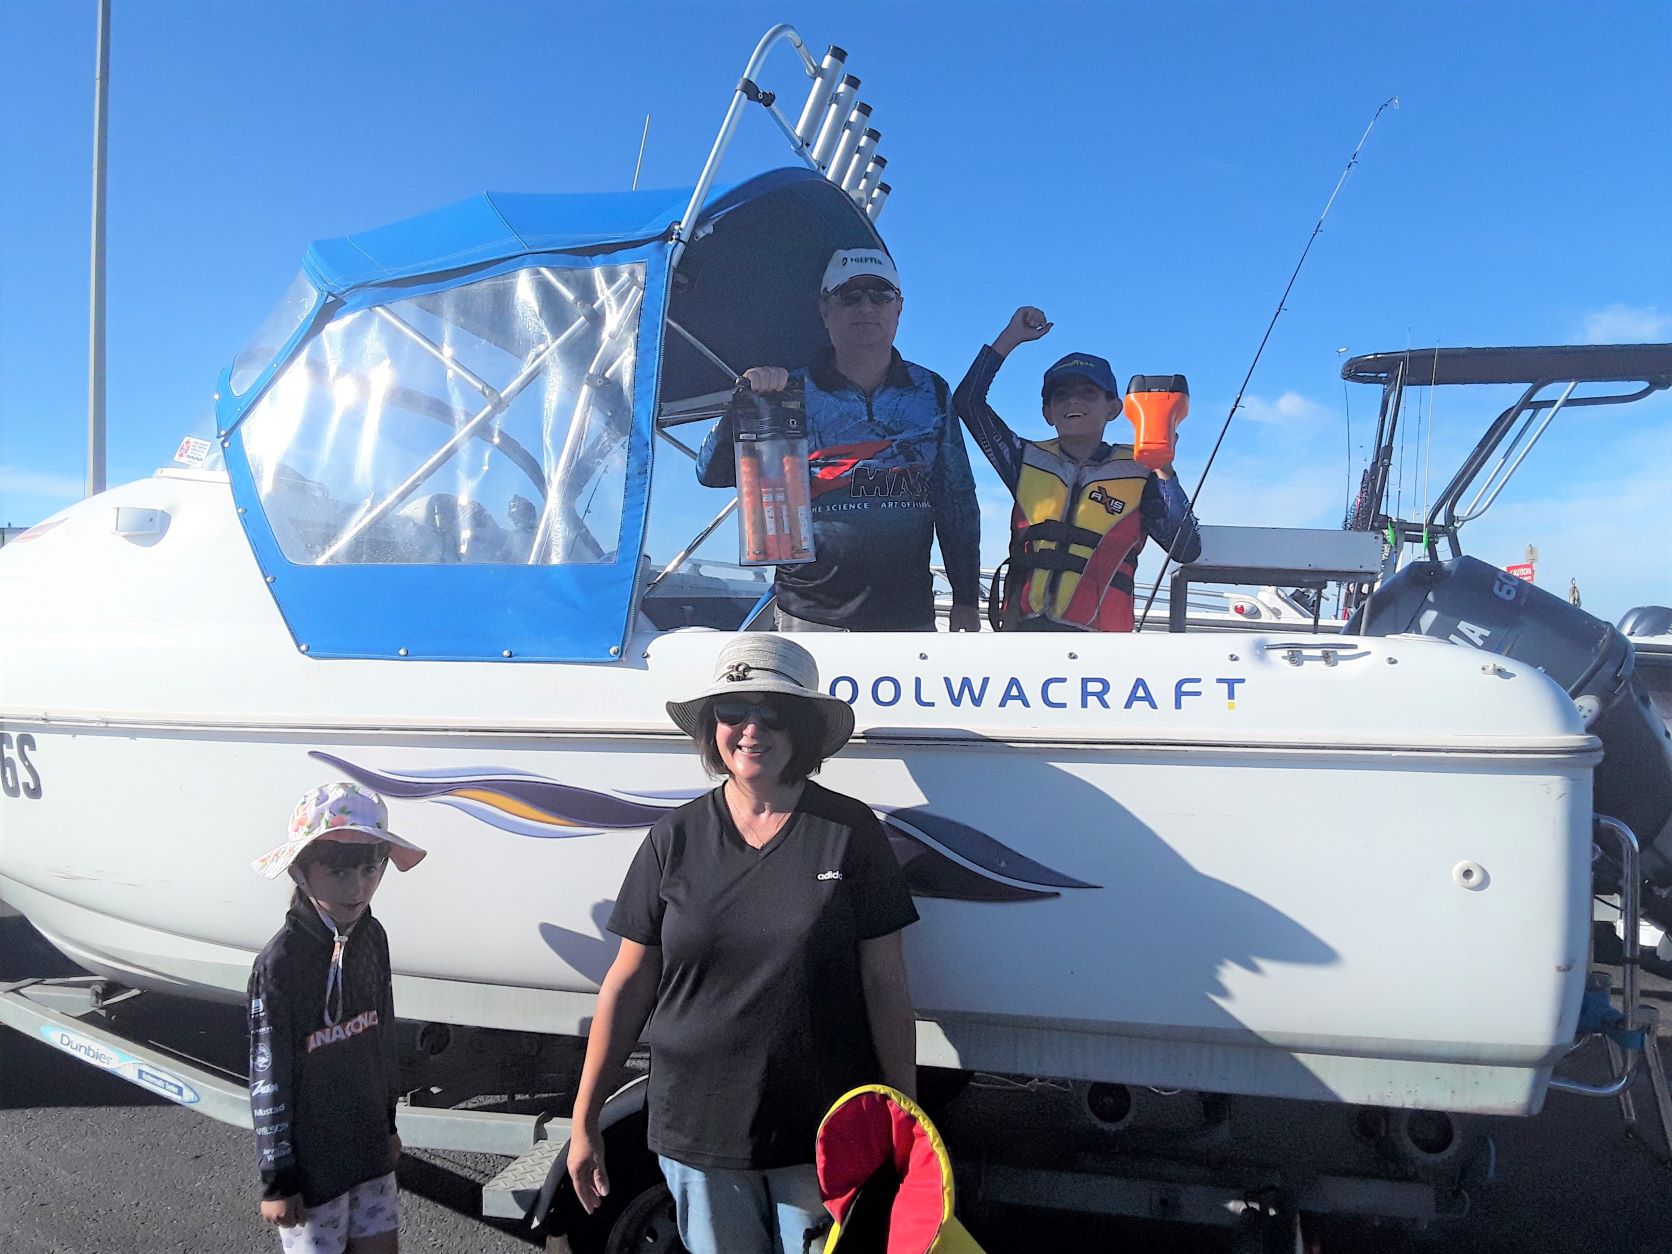 Family next to a boat showing their safety equipment